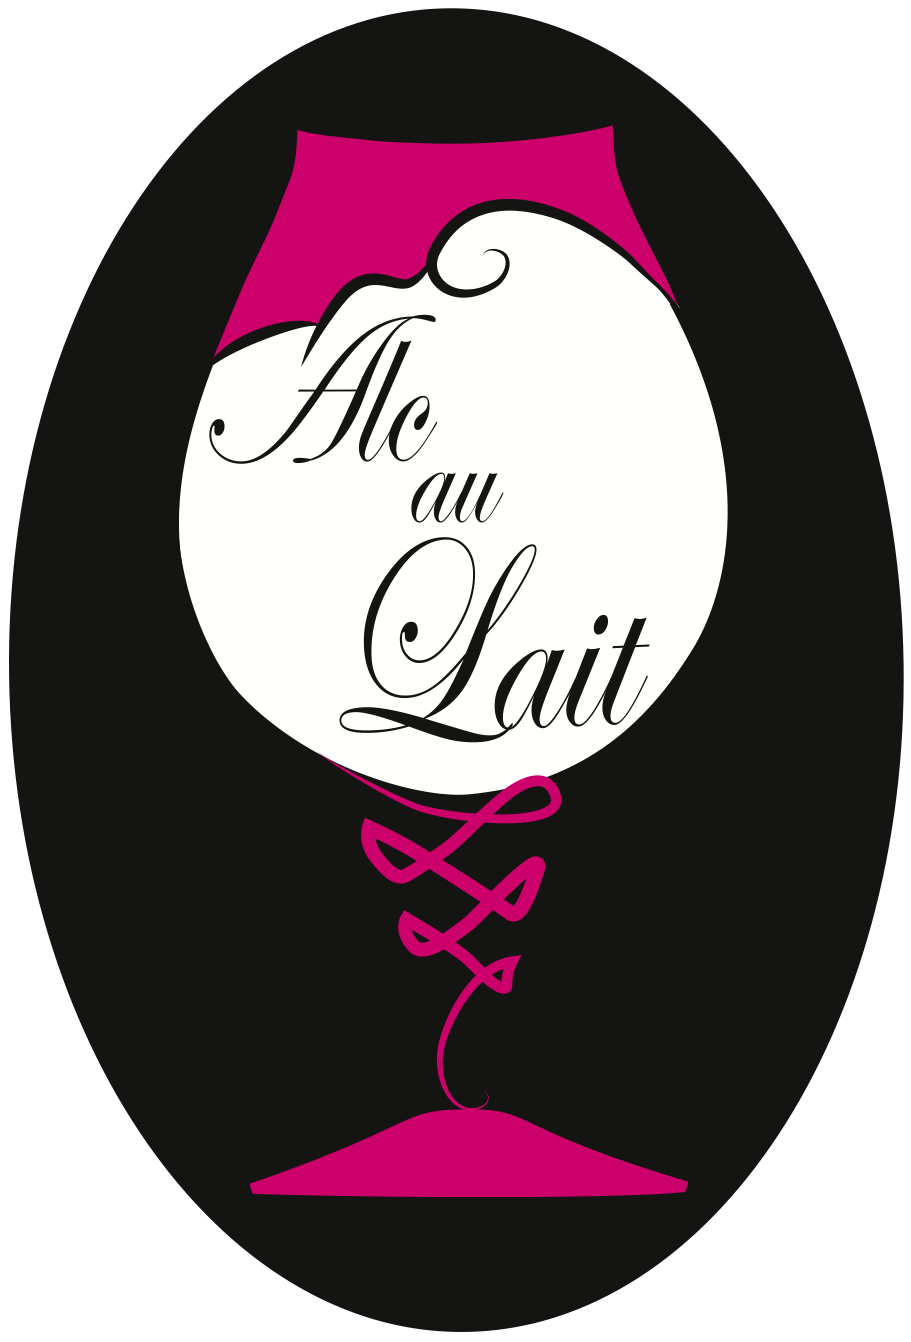 Logo showing a stylised wine glass with the name Alc au Lait on it.